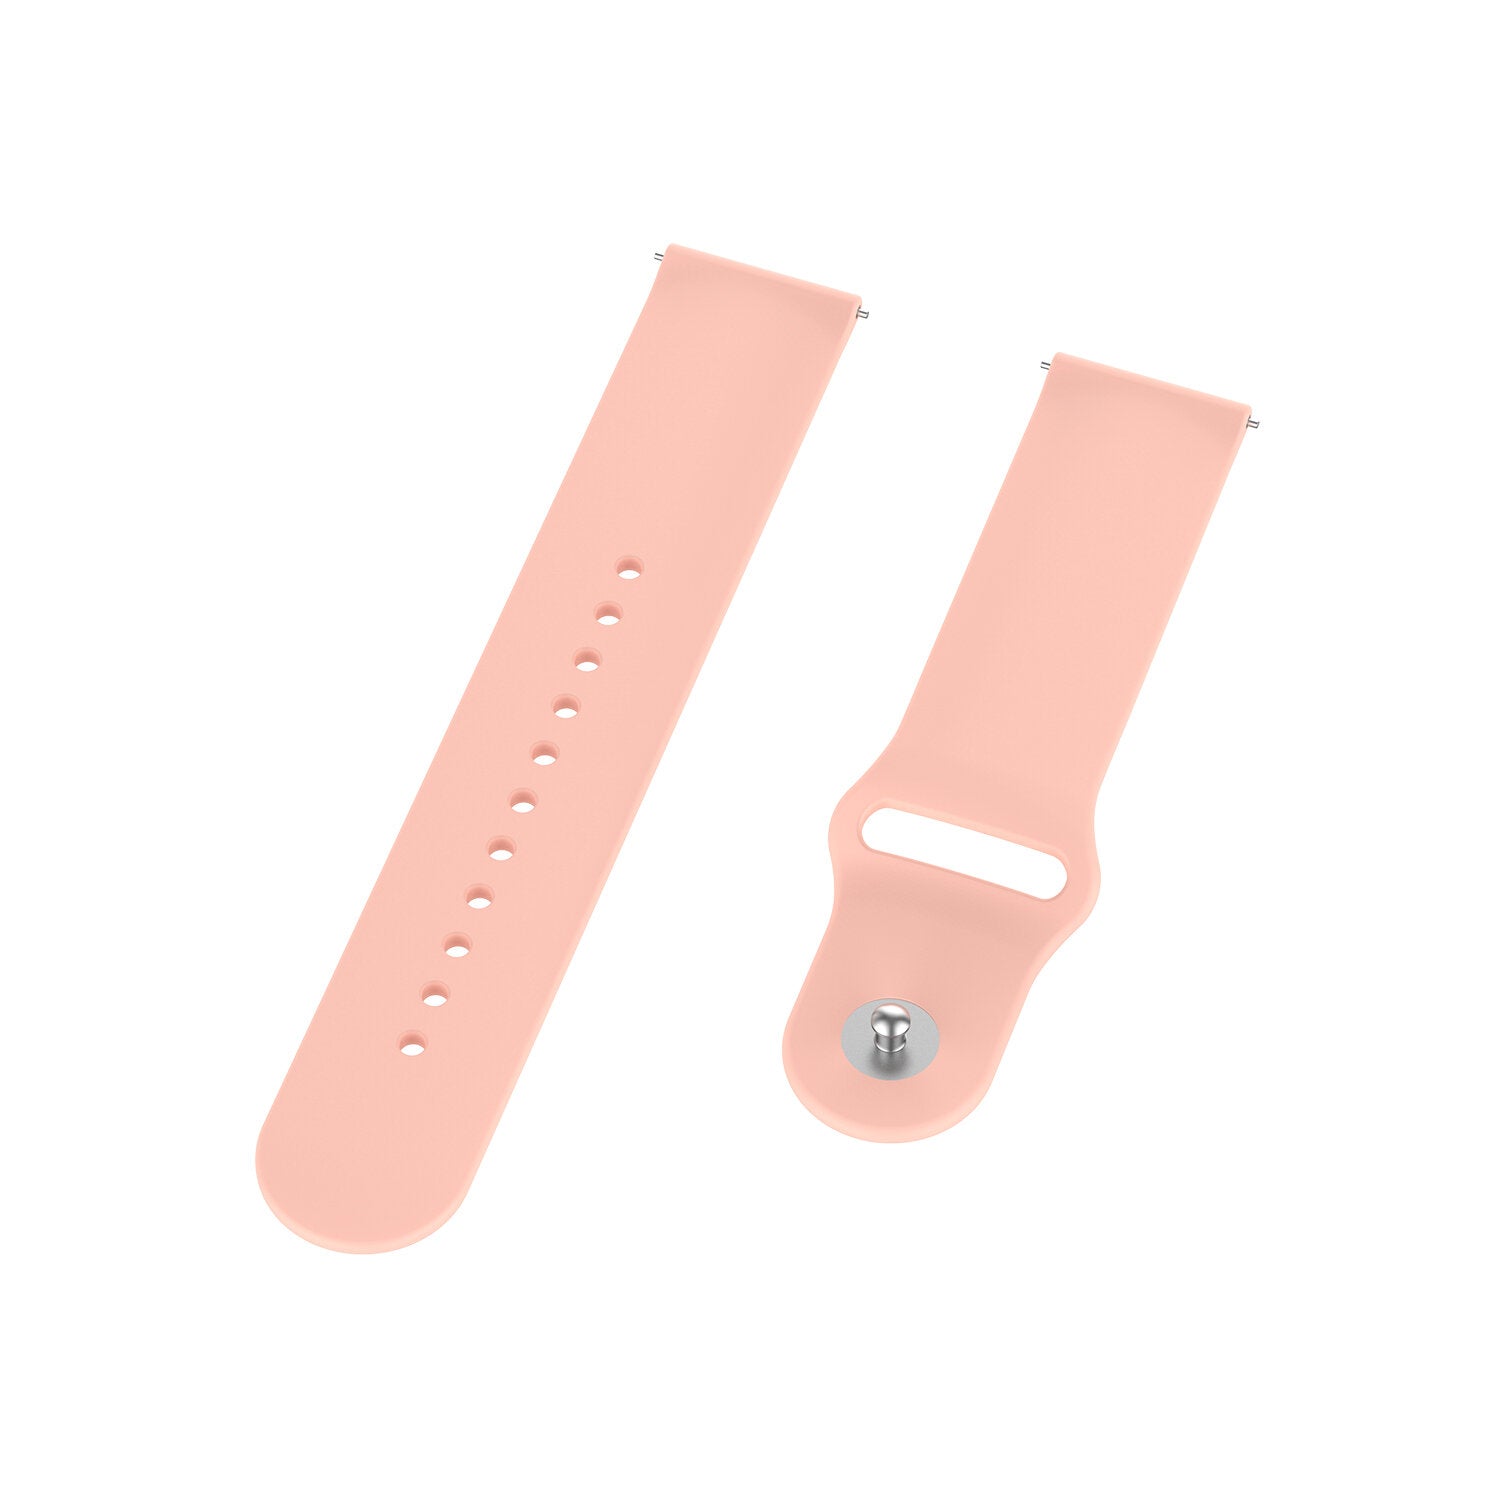 22mm Solid Color SLR Buckle Silicone Replacement Strap Smart Watch Band For Samsung Galaxy Watch 46MM